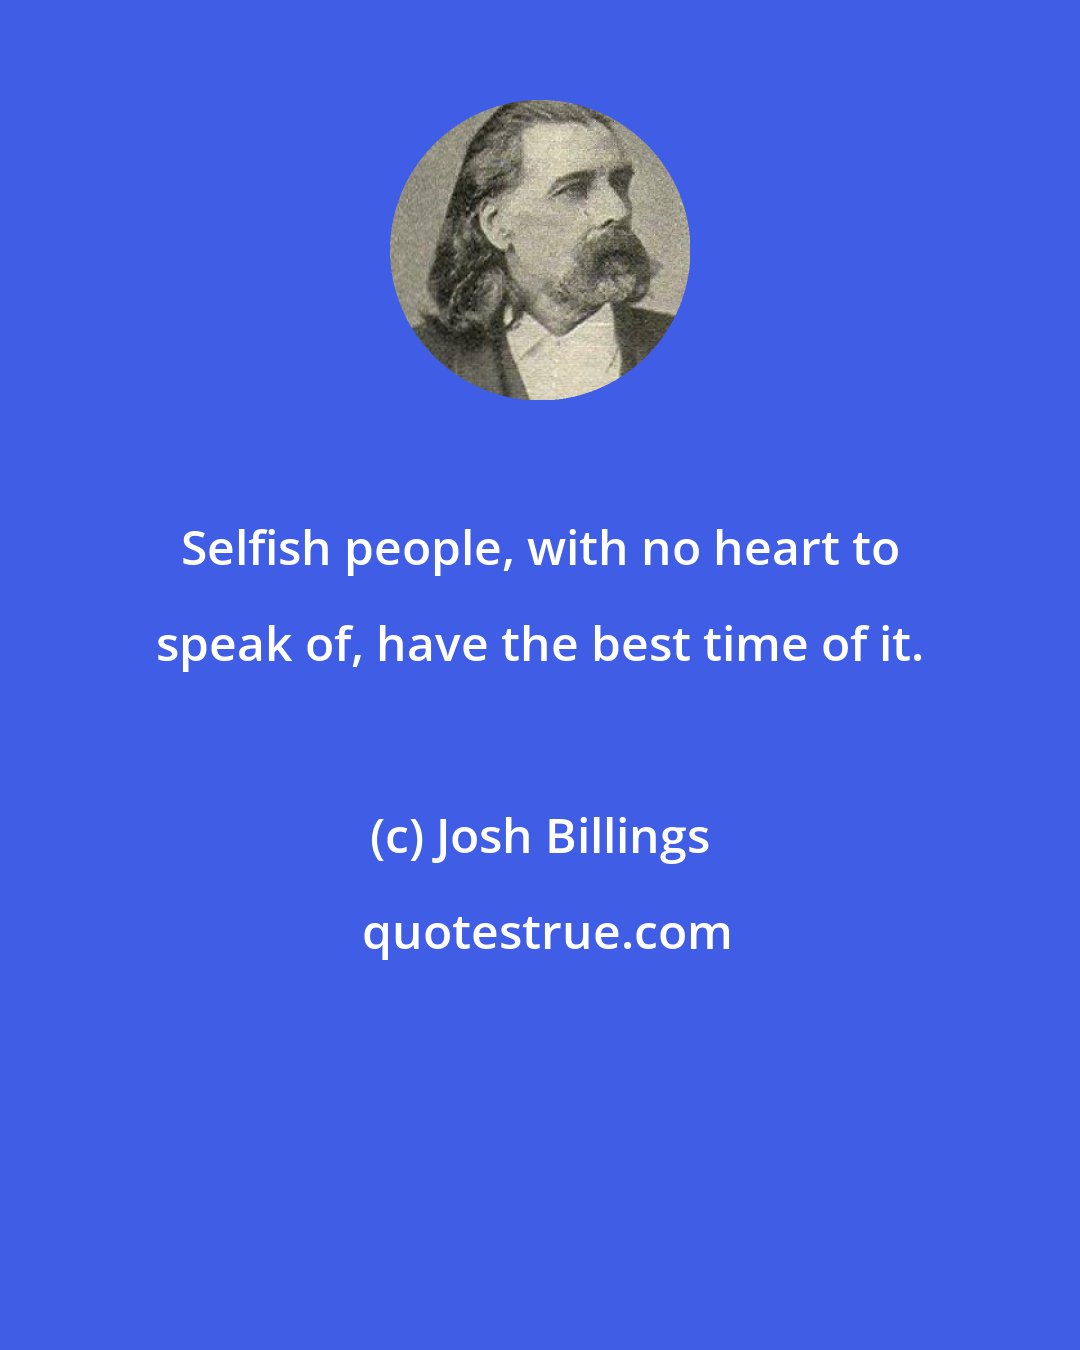 Josh Billings: Selfish people, with no heart to speak of, have the best time of it.